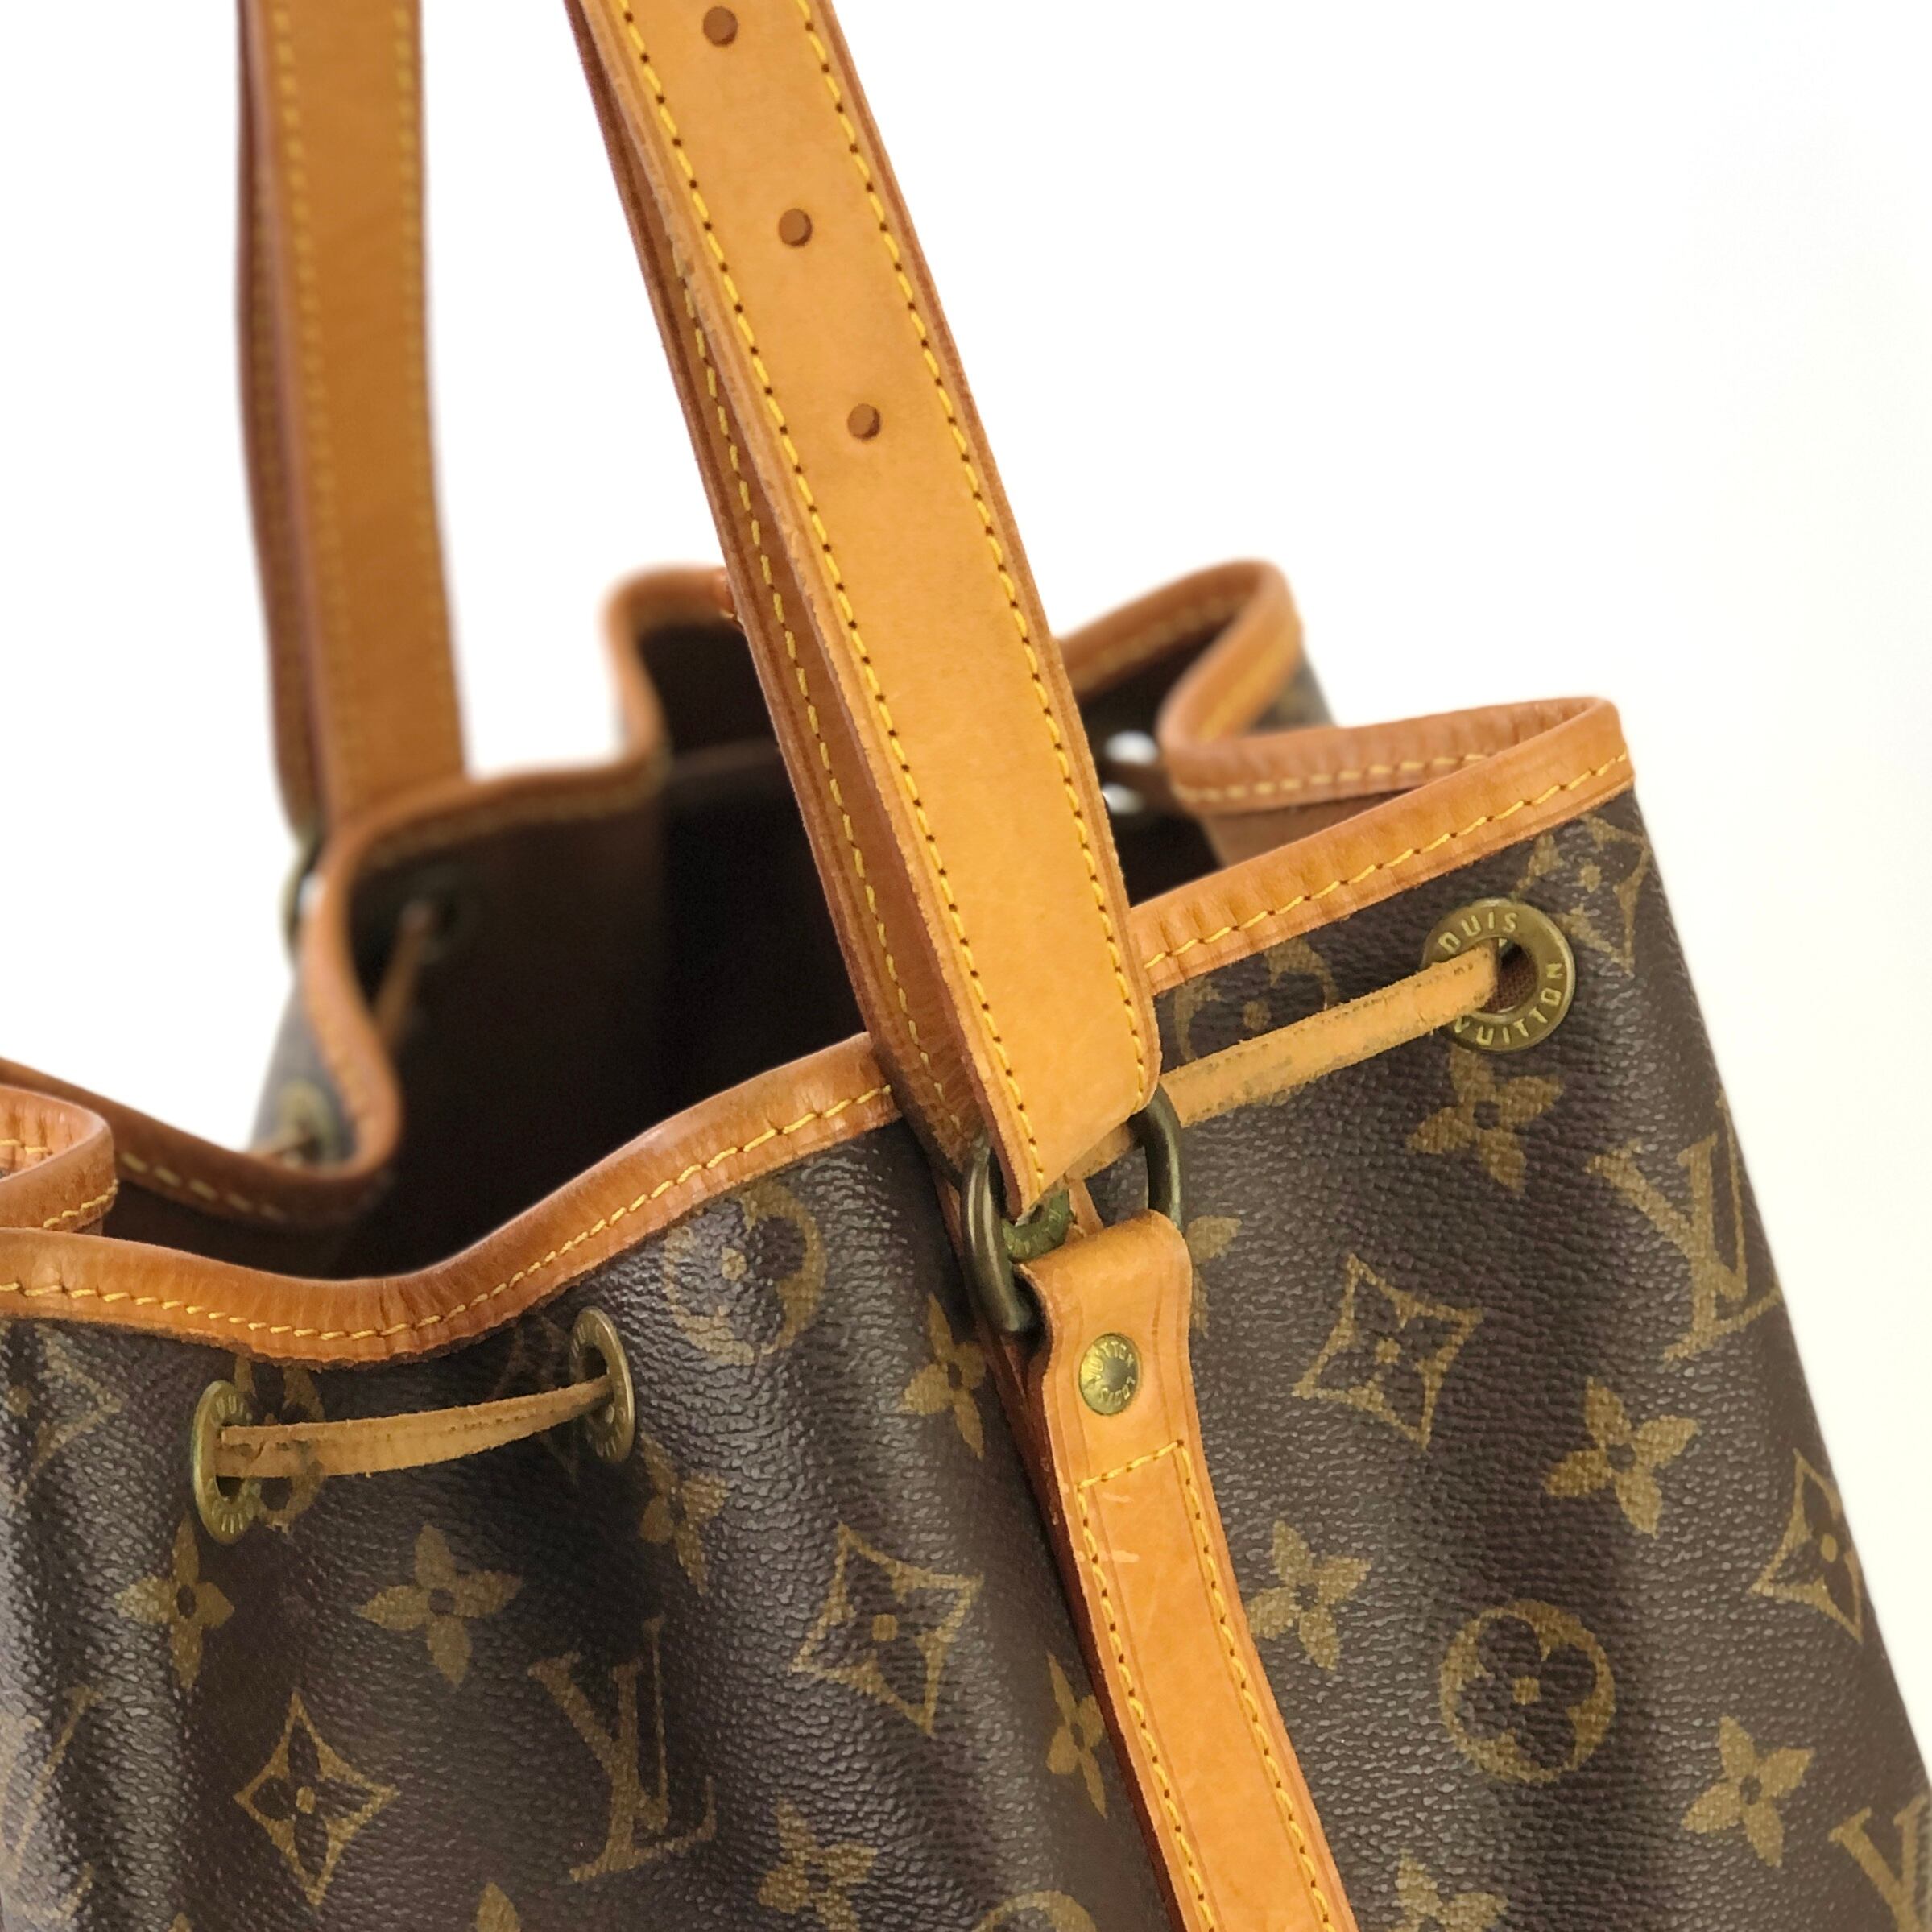 LOUIS VUITTON 　ルイ ヴィトン　モノグラム 　M42224　ノエ　巾着　ショルダーバッグ　ブラウン　vintage　ヴィンテージ 　 m7wx8x | VintageShop solo powered by BASE